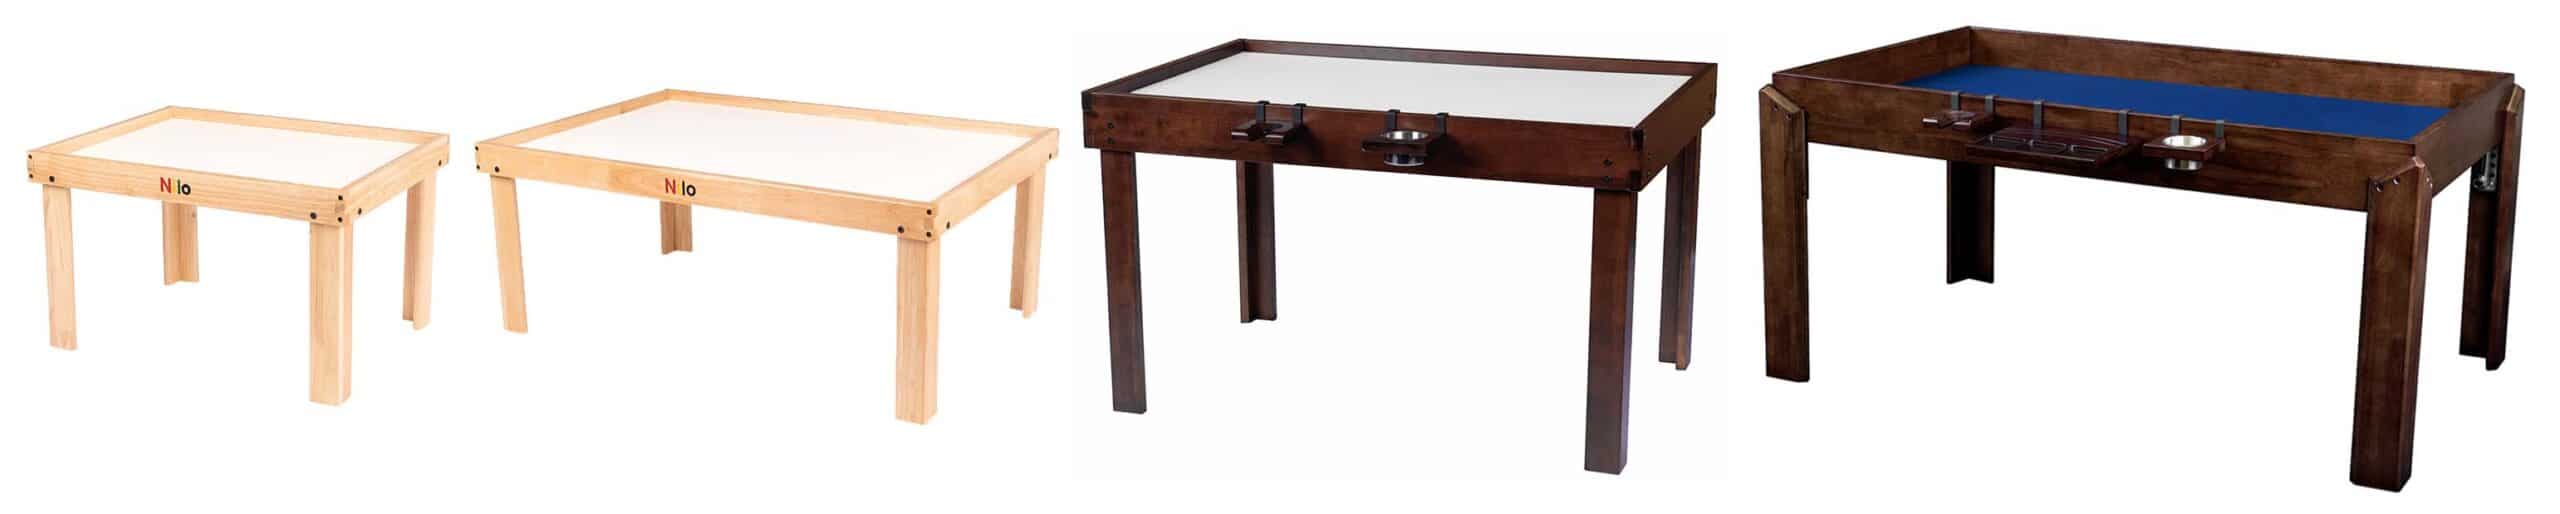 board game coffee table, coffee game table, game table options, coffee table options, coffee table furniture, puzzle table